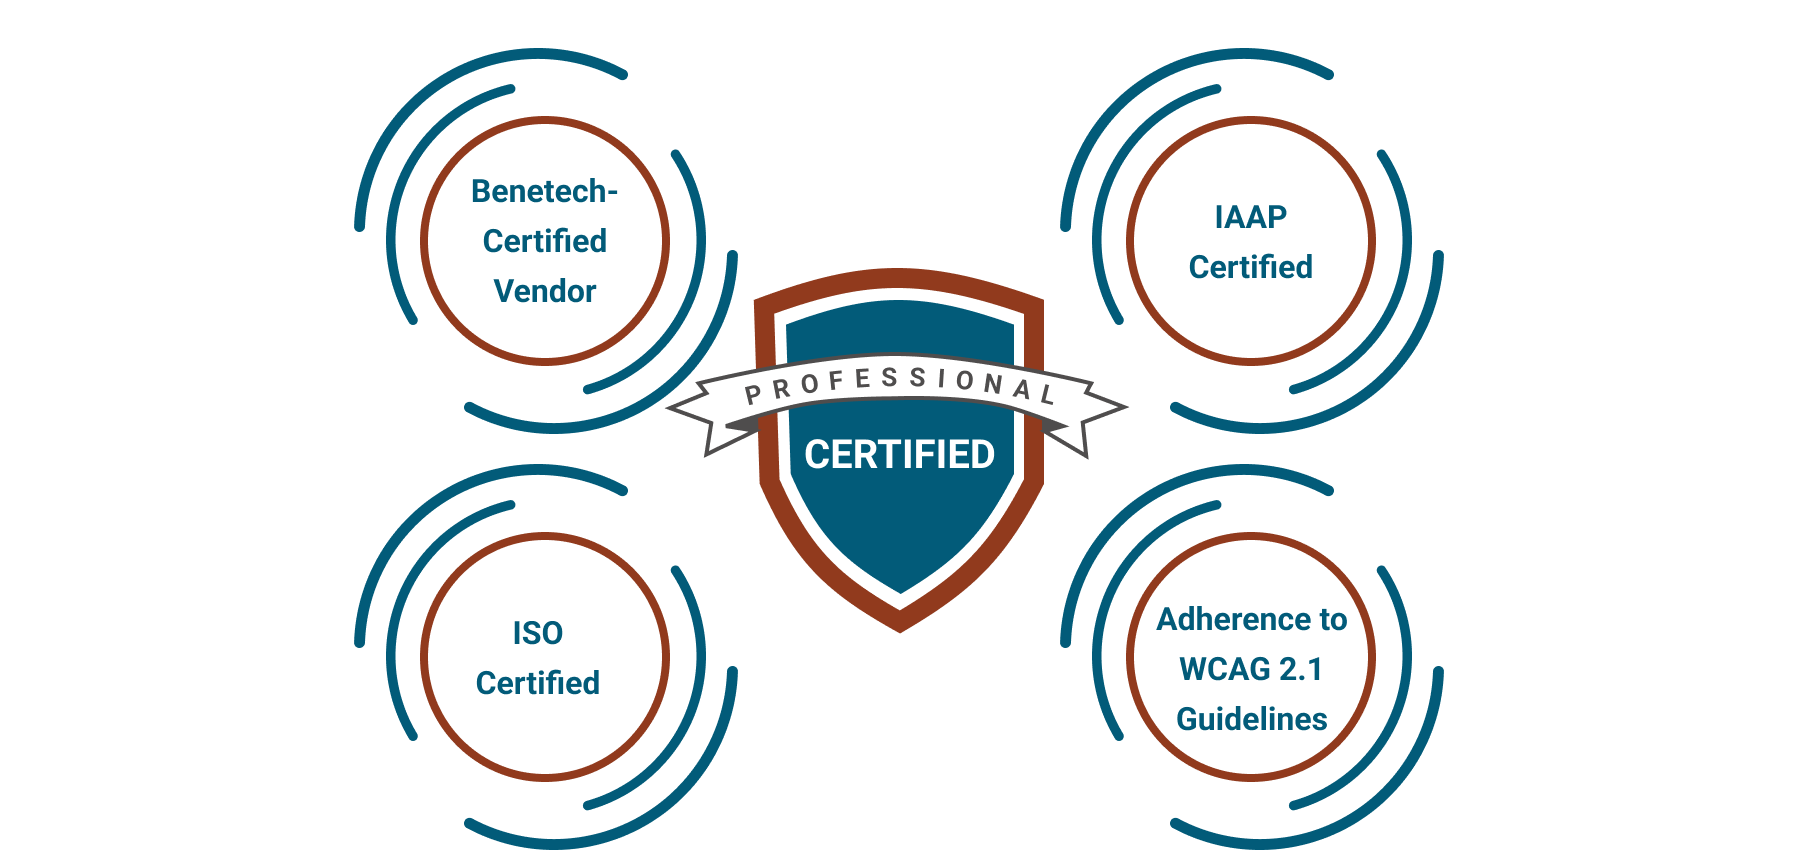 Professional Certified - for instance: Benetech-Certified vendor, I A A P-Certified, ISO-Certified, and Adherence to WCAG 2.1 Guidelines.